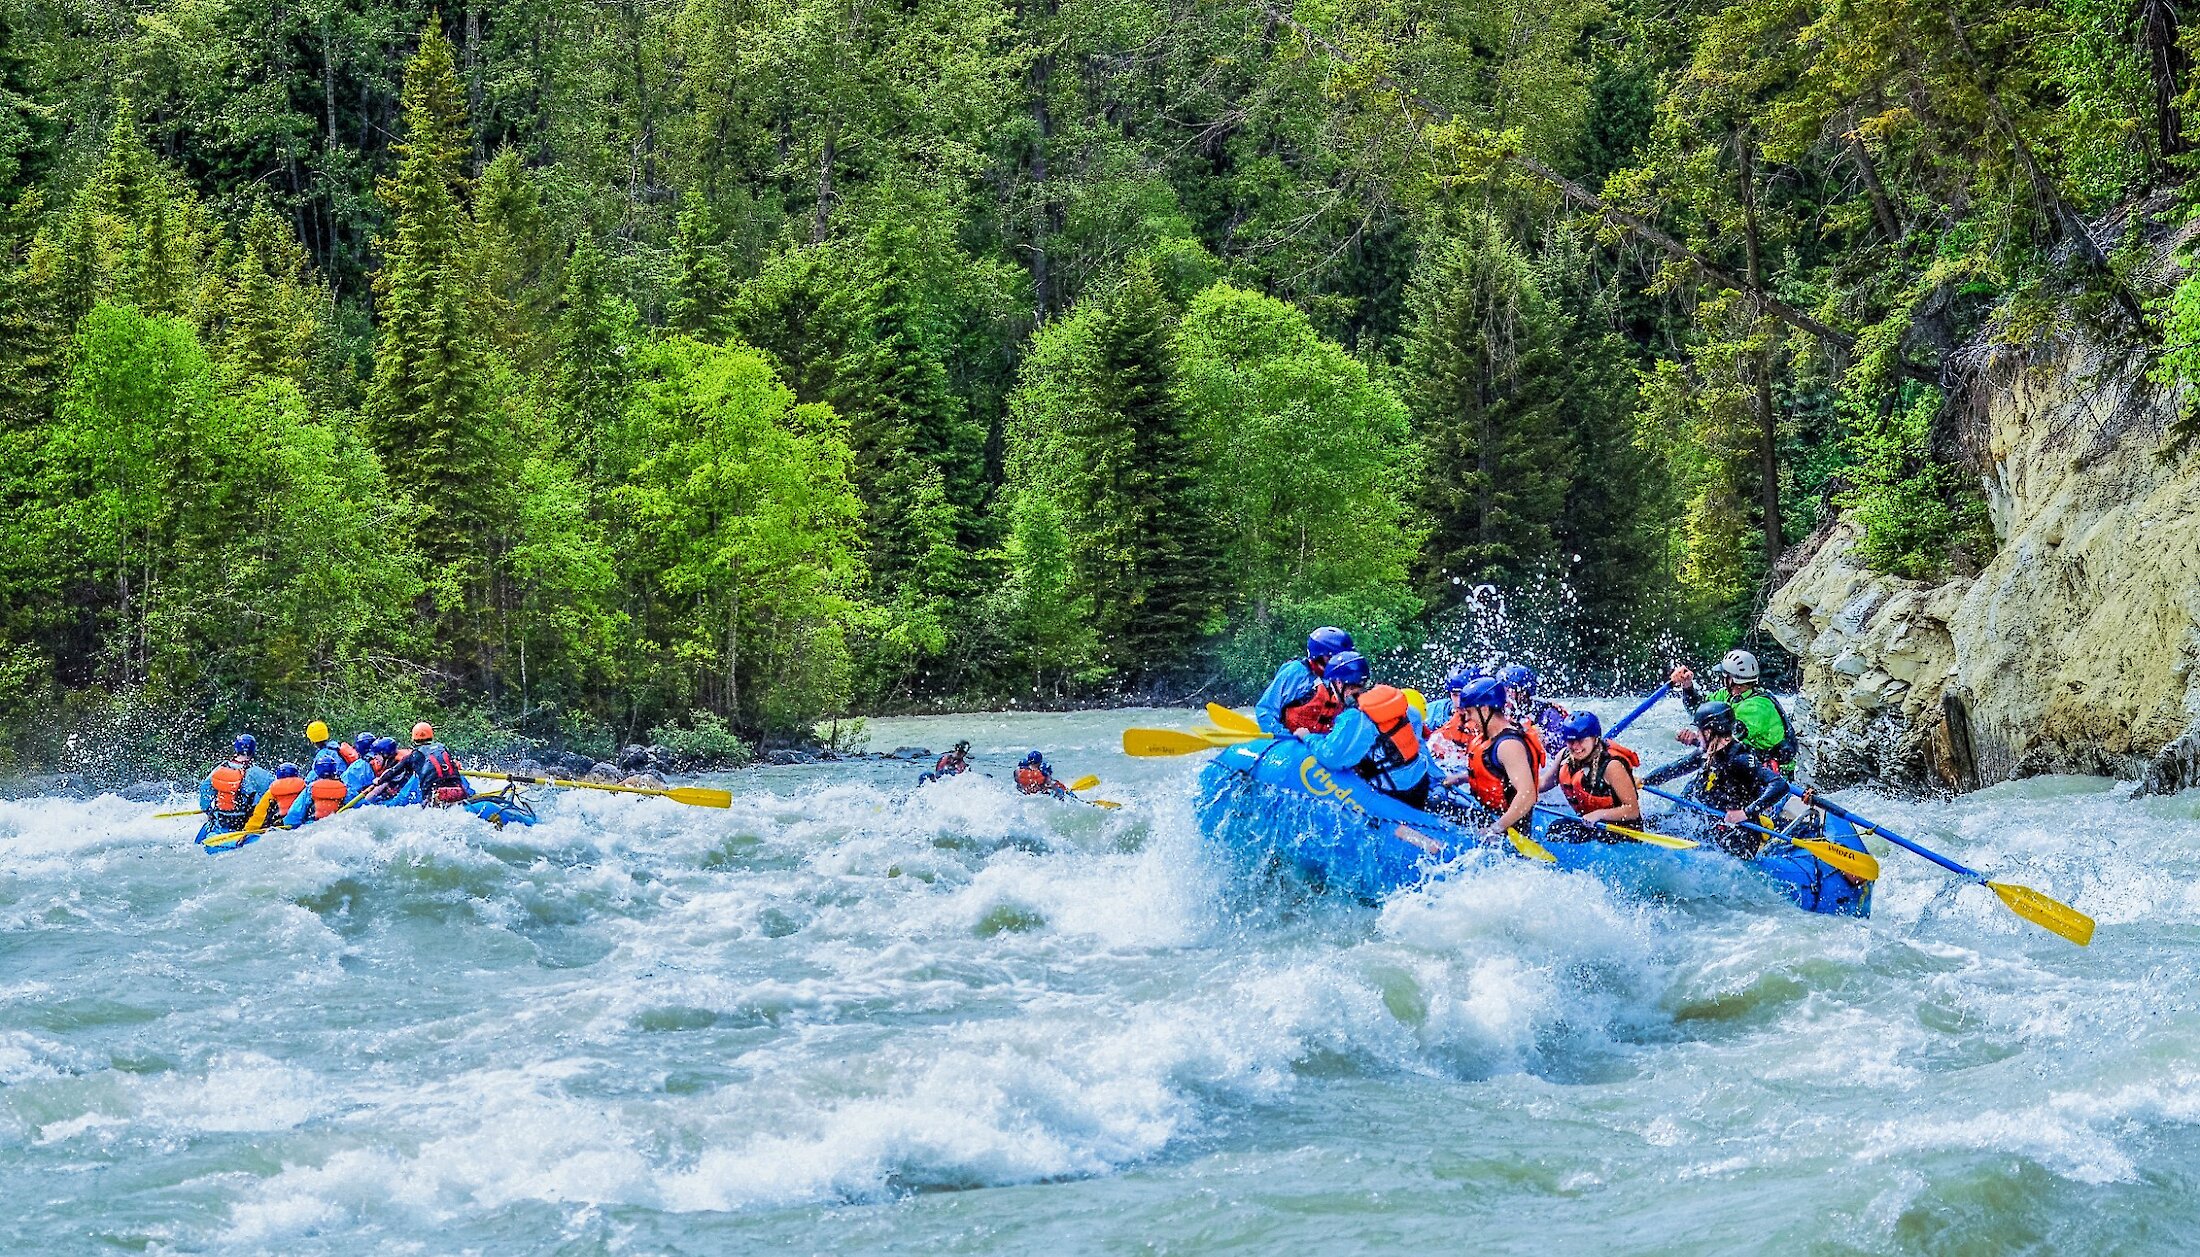 Thrilling raft ride on the Kicking Horse River